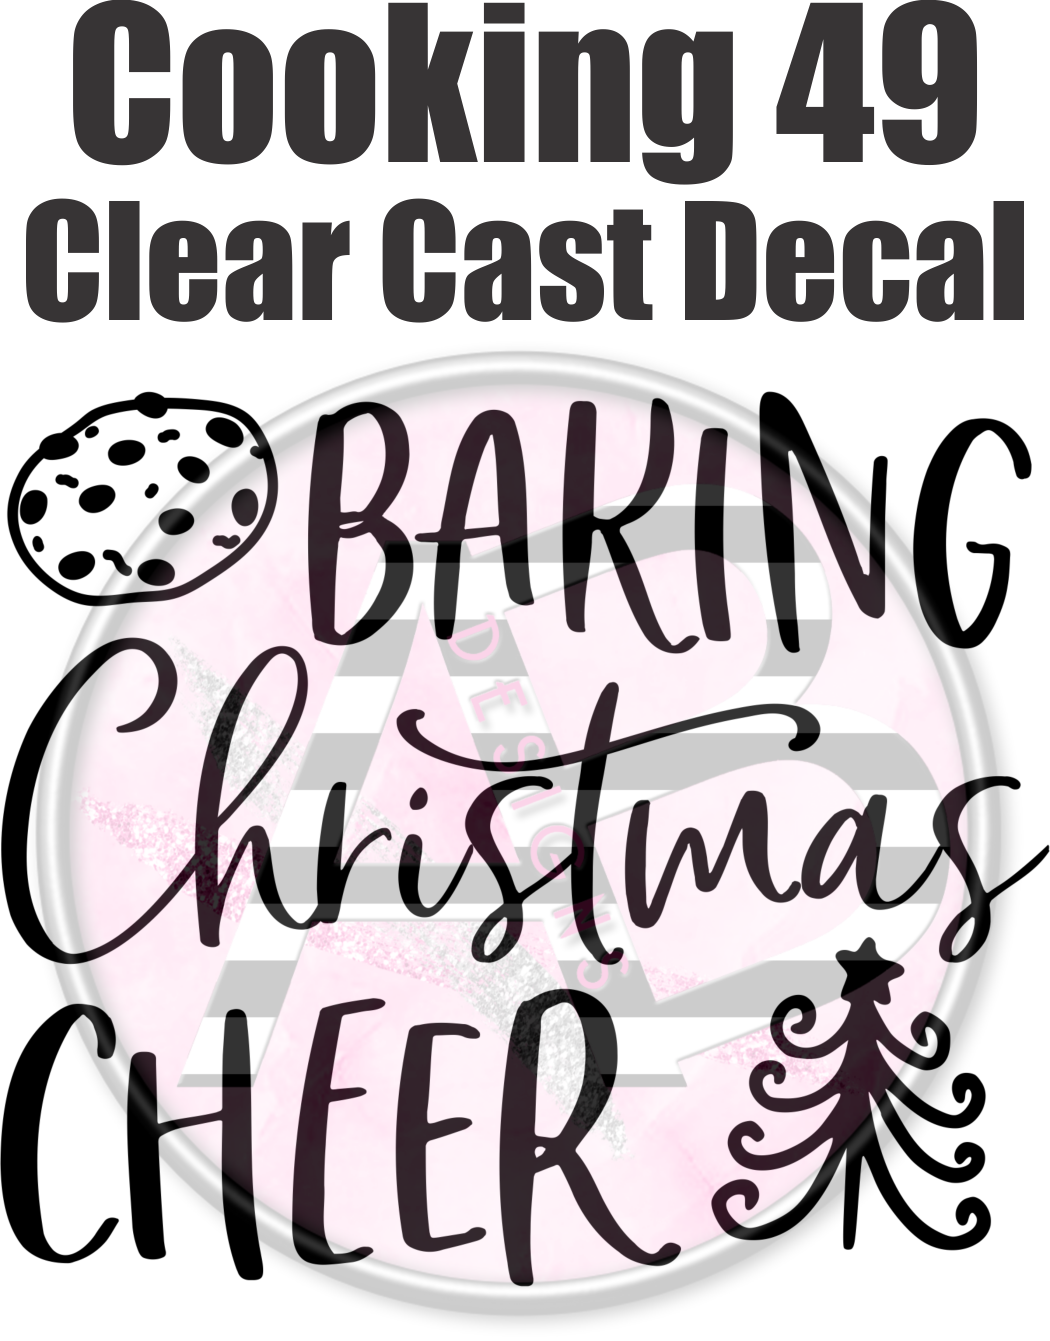 Cooking 49 - Clear Cast Decal - 197